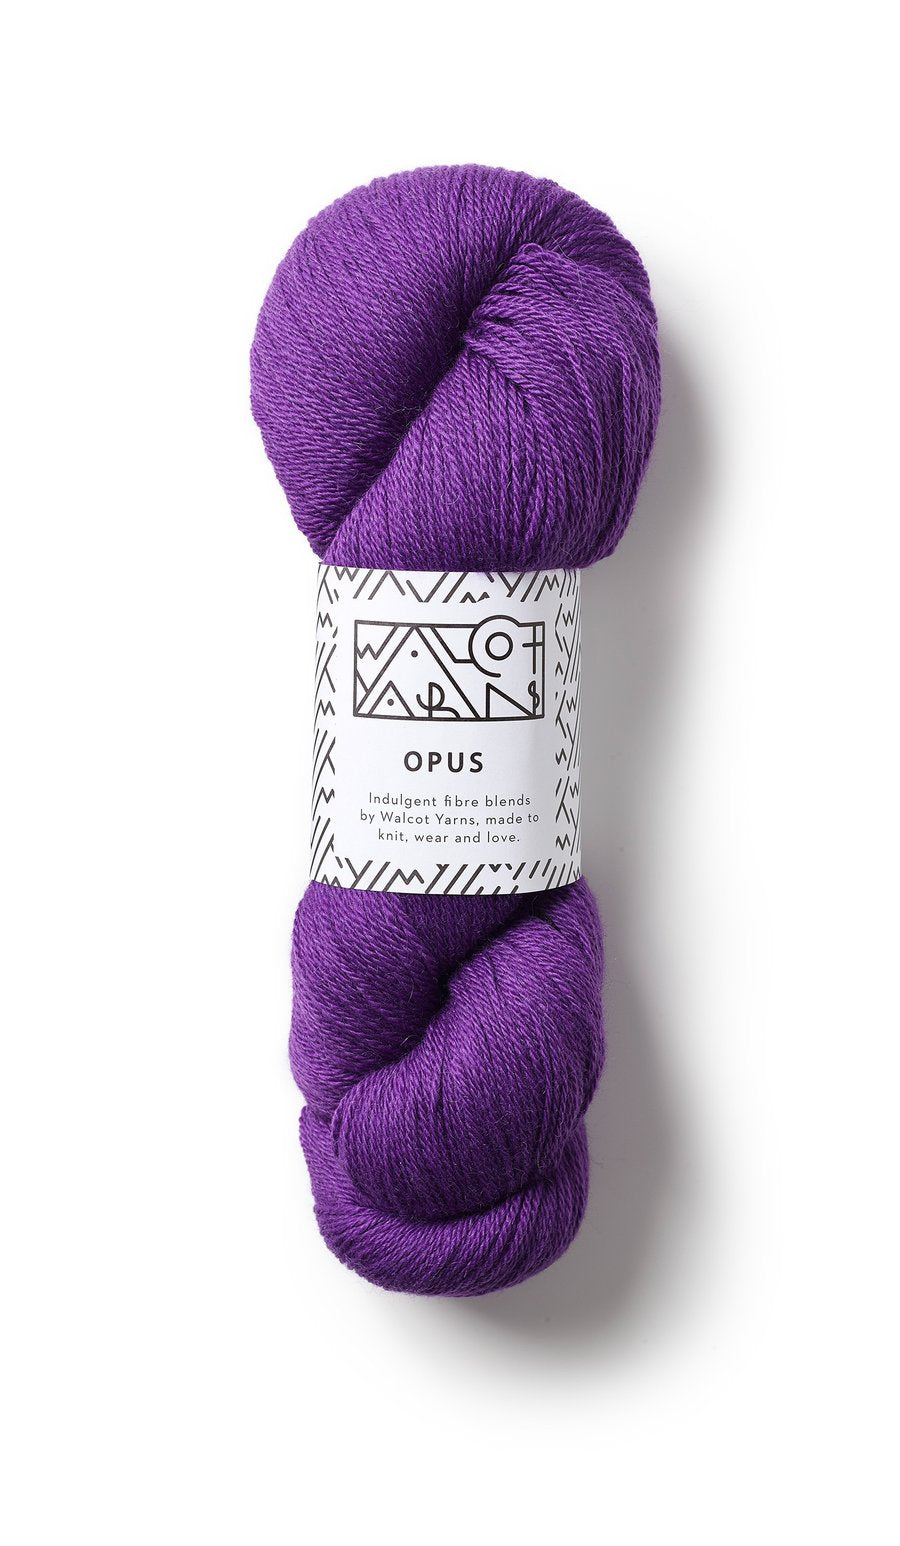 High Quality 100% Merino Wool Crochet Sustainable Yarn 50g/Ball, 180m,  Thick For Hand Knitting, Space Dyed Baby Yolds, Wool Thread L231130 From  Spider_hoodie, $1.39